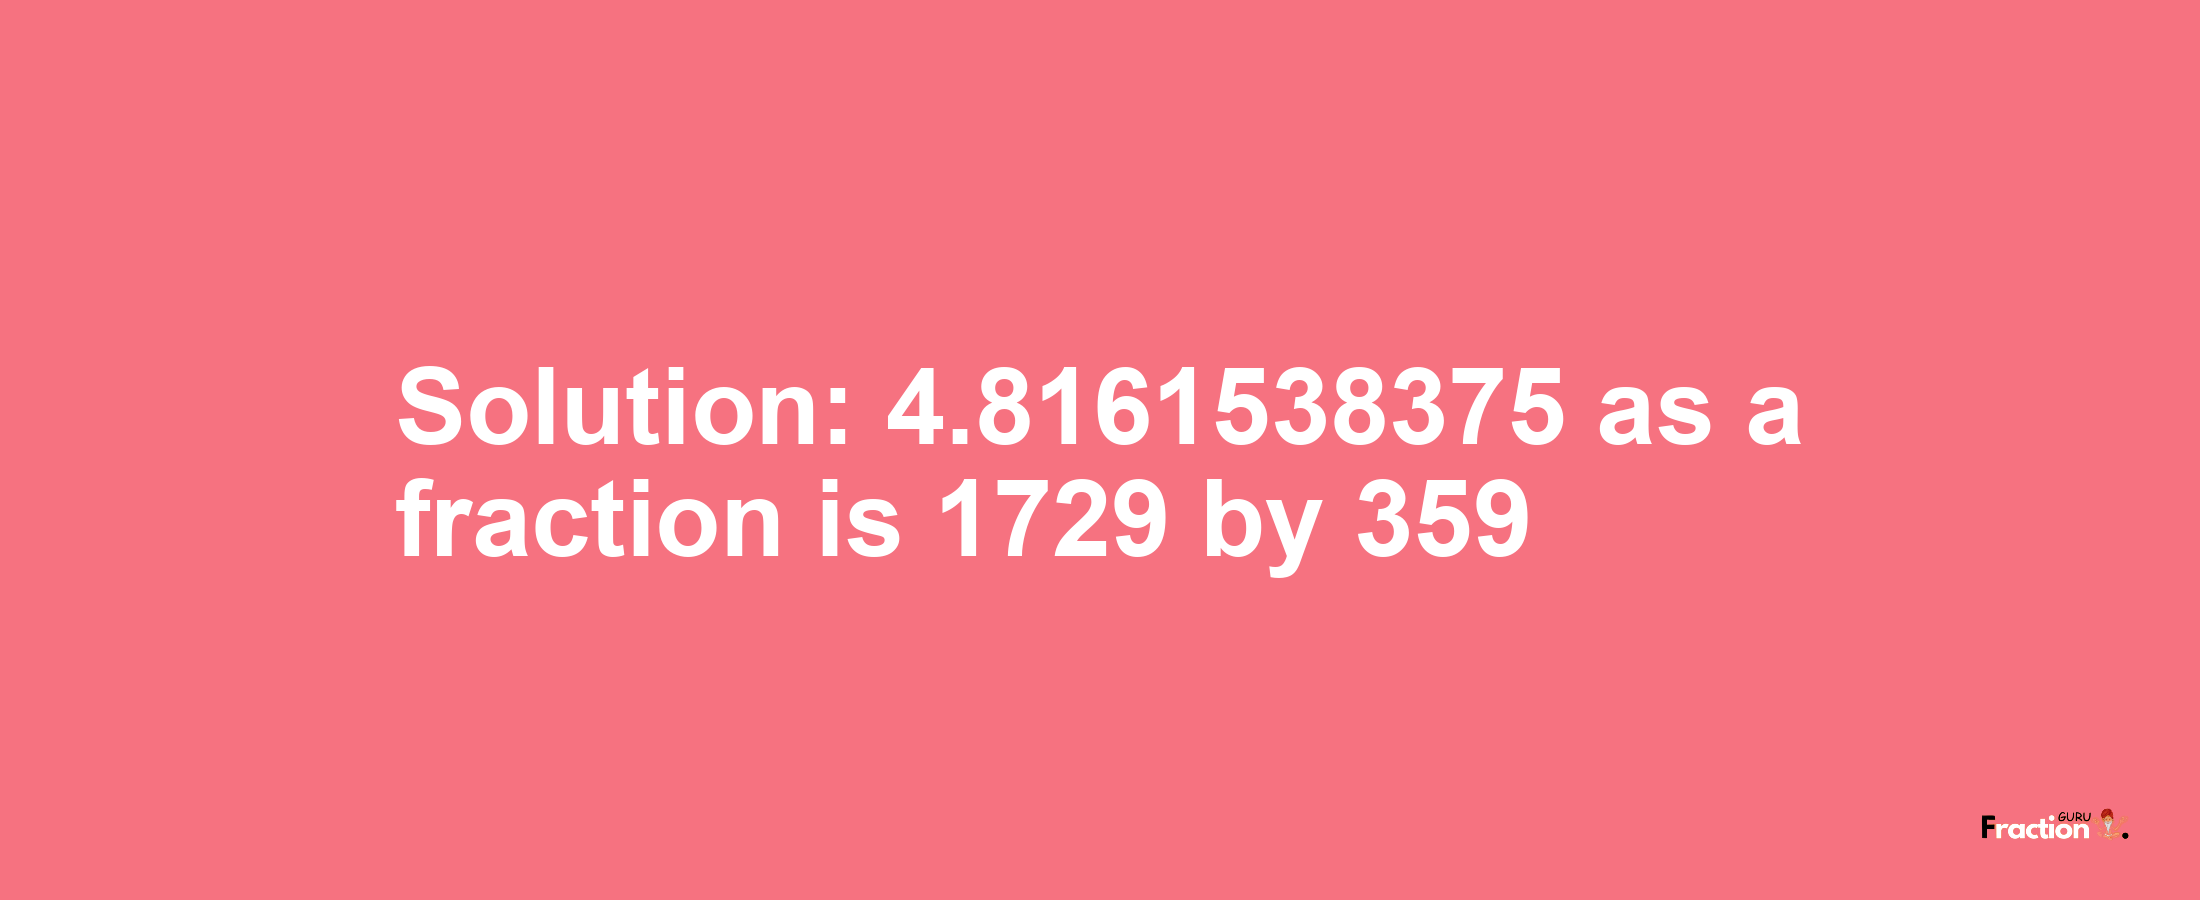 Solution:4.8161538375 as a fraction is 1729/359